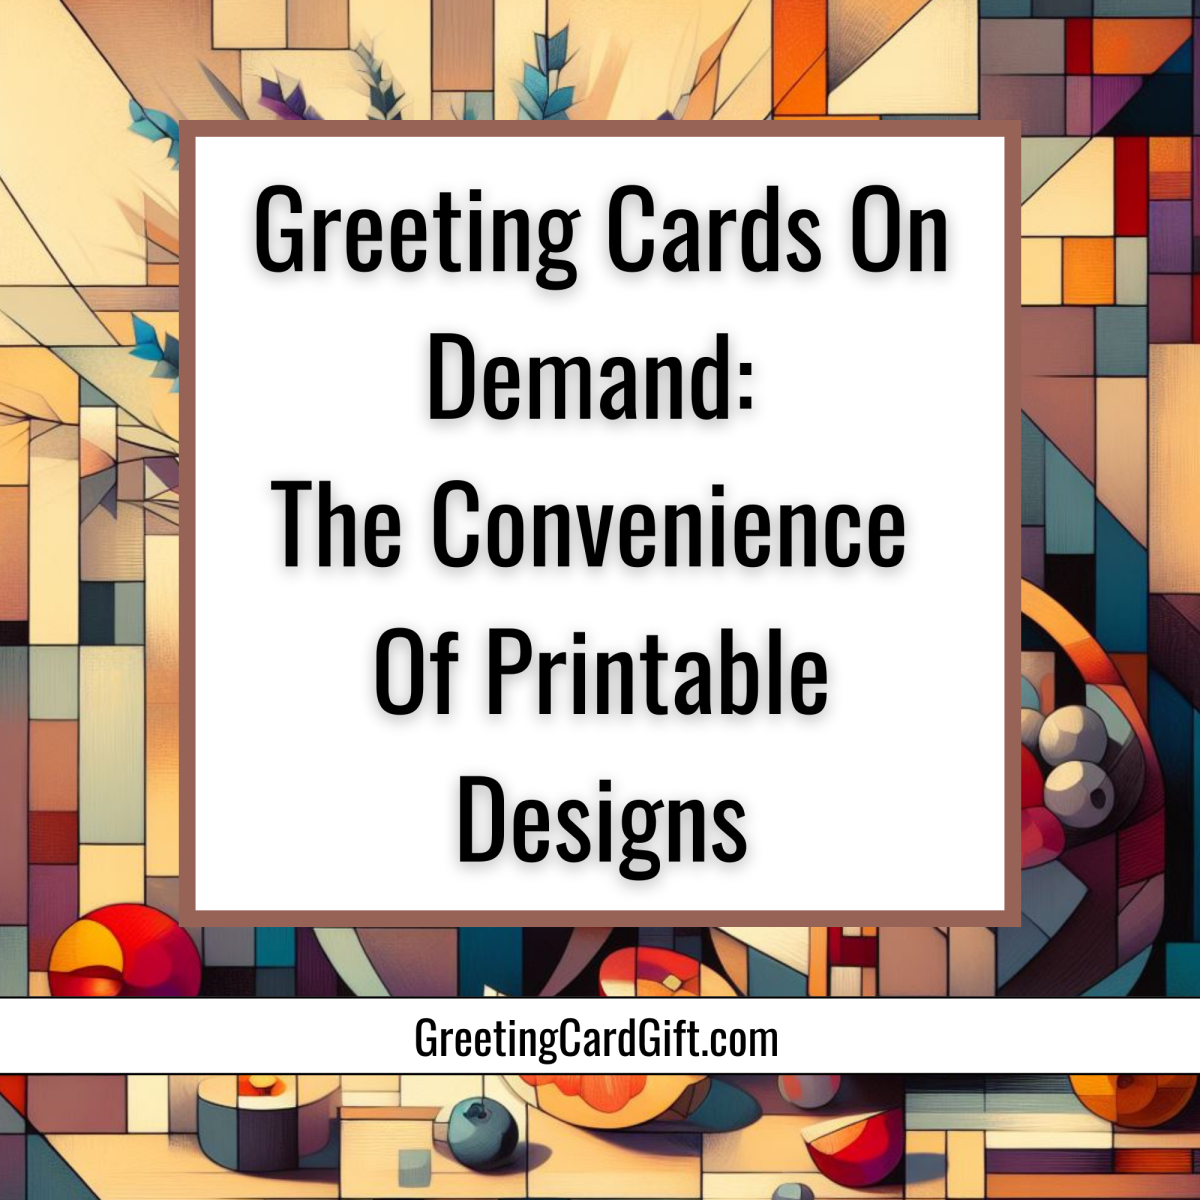 Greeting Cards On Demand: The Convenience Of Printable Designs